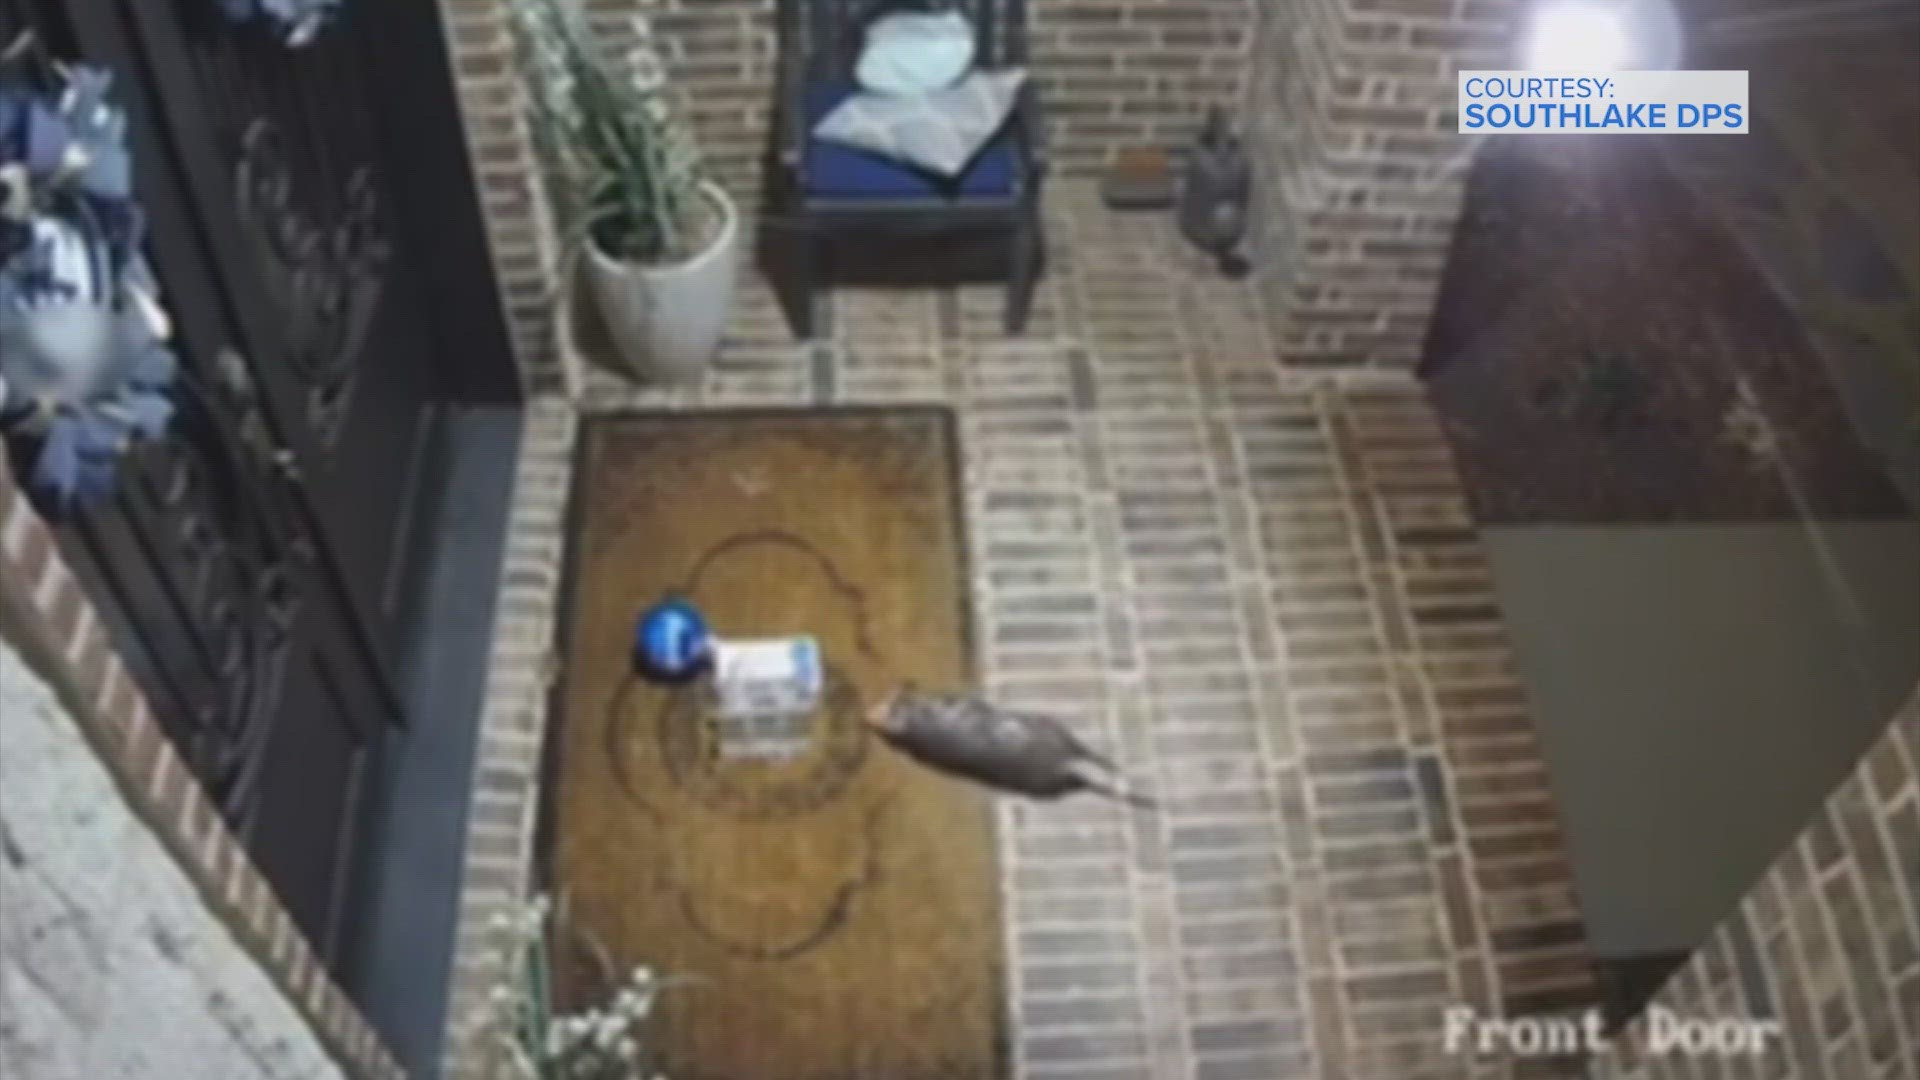 The Southlake Department of Public Safety released surveillance video from Jan. 27, 2024, showing a possum stealing a Tiff's Treats package off a porch in Texas.